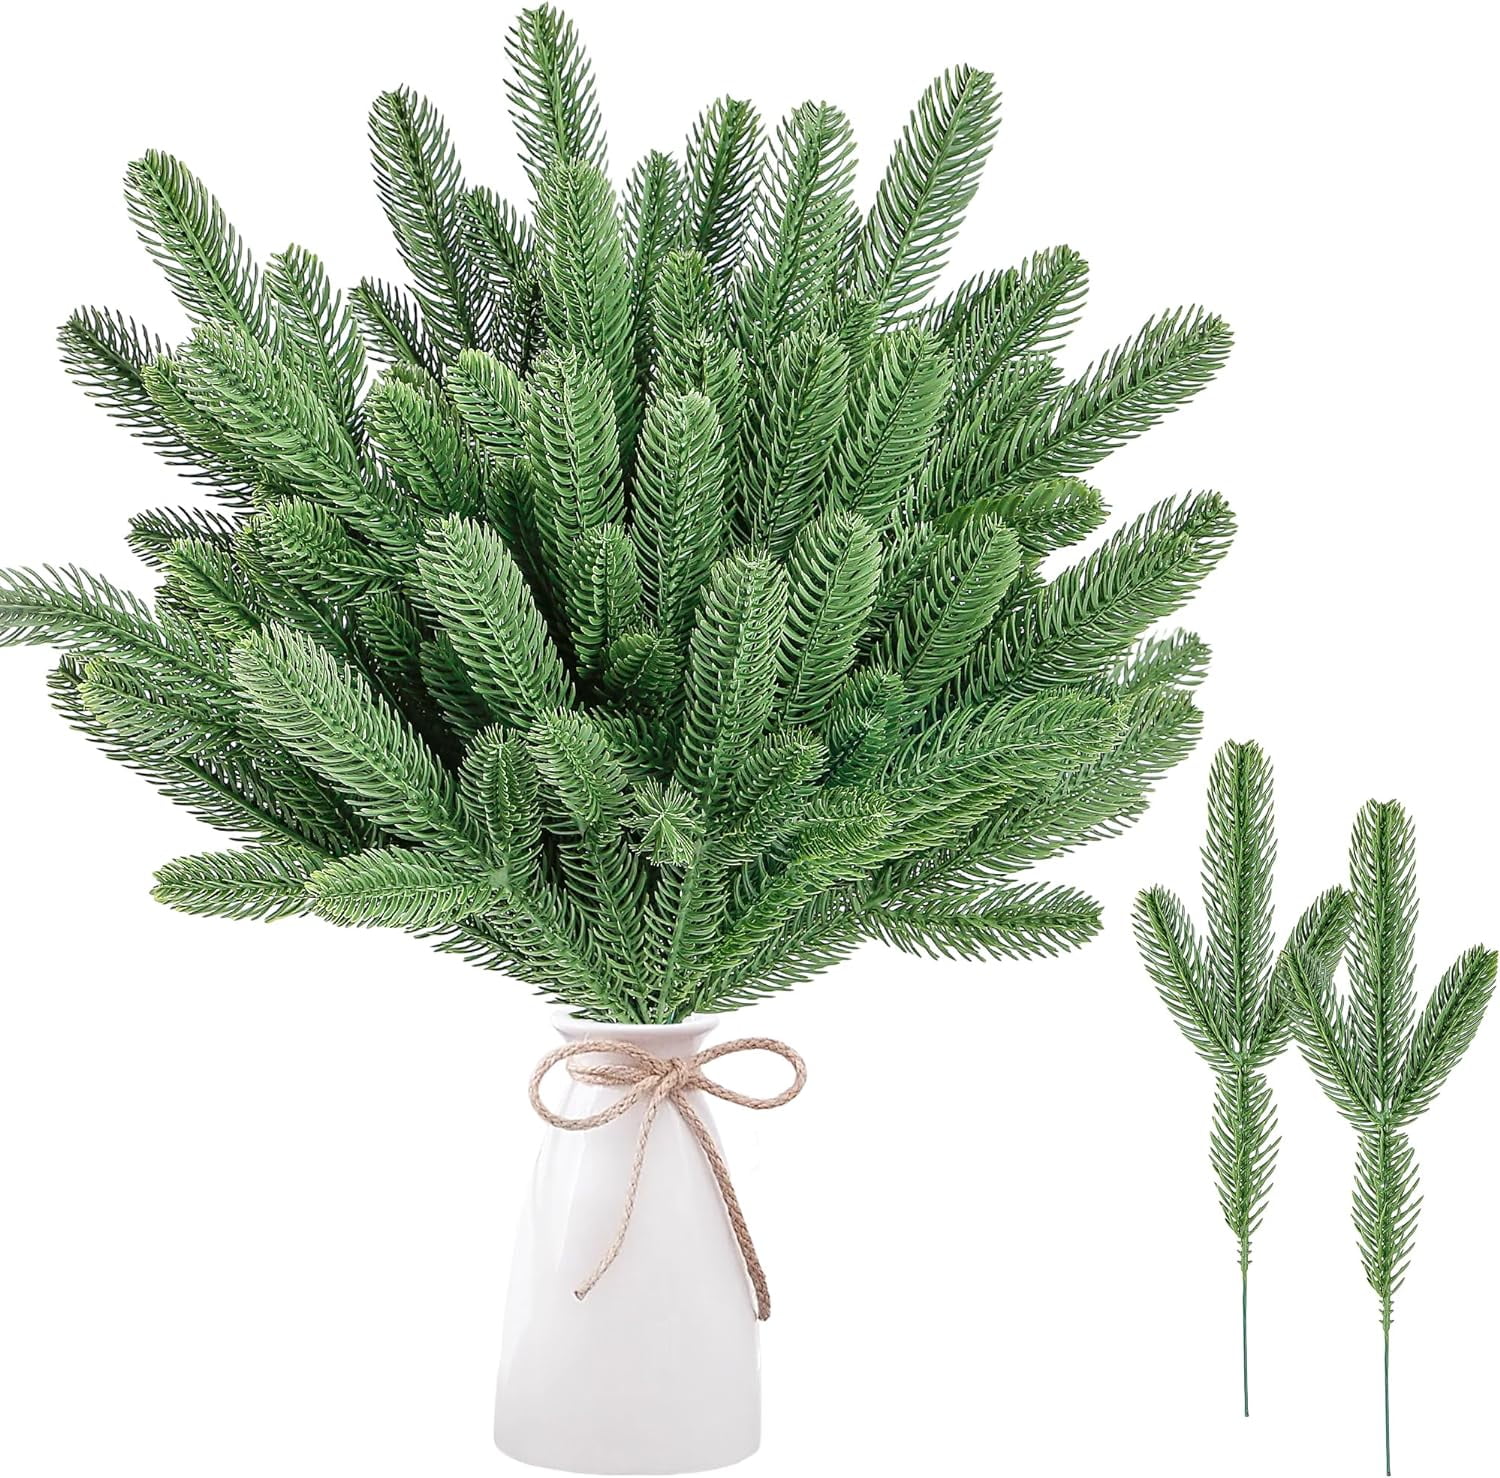 Faux Pine Branch Realistic Reusable Artificial Pine Branches 30pcs Faux  Green Plants for Diy Christmas Wreaths Home Decor Crafts - AliExpress